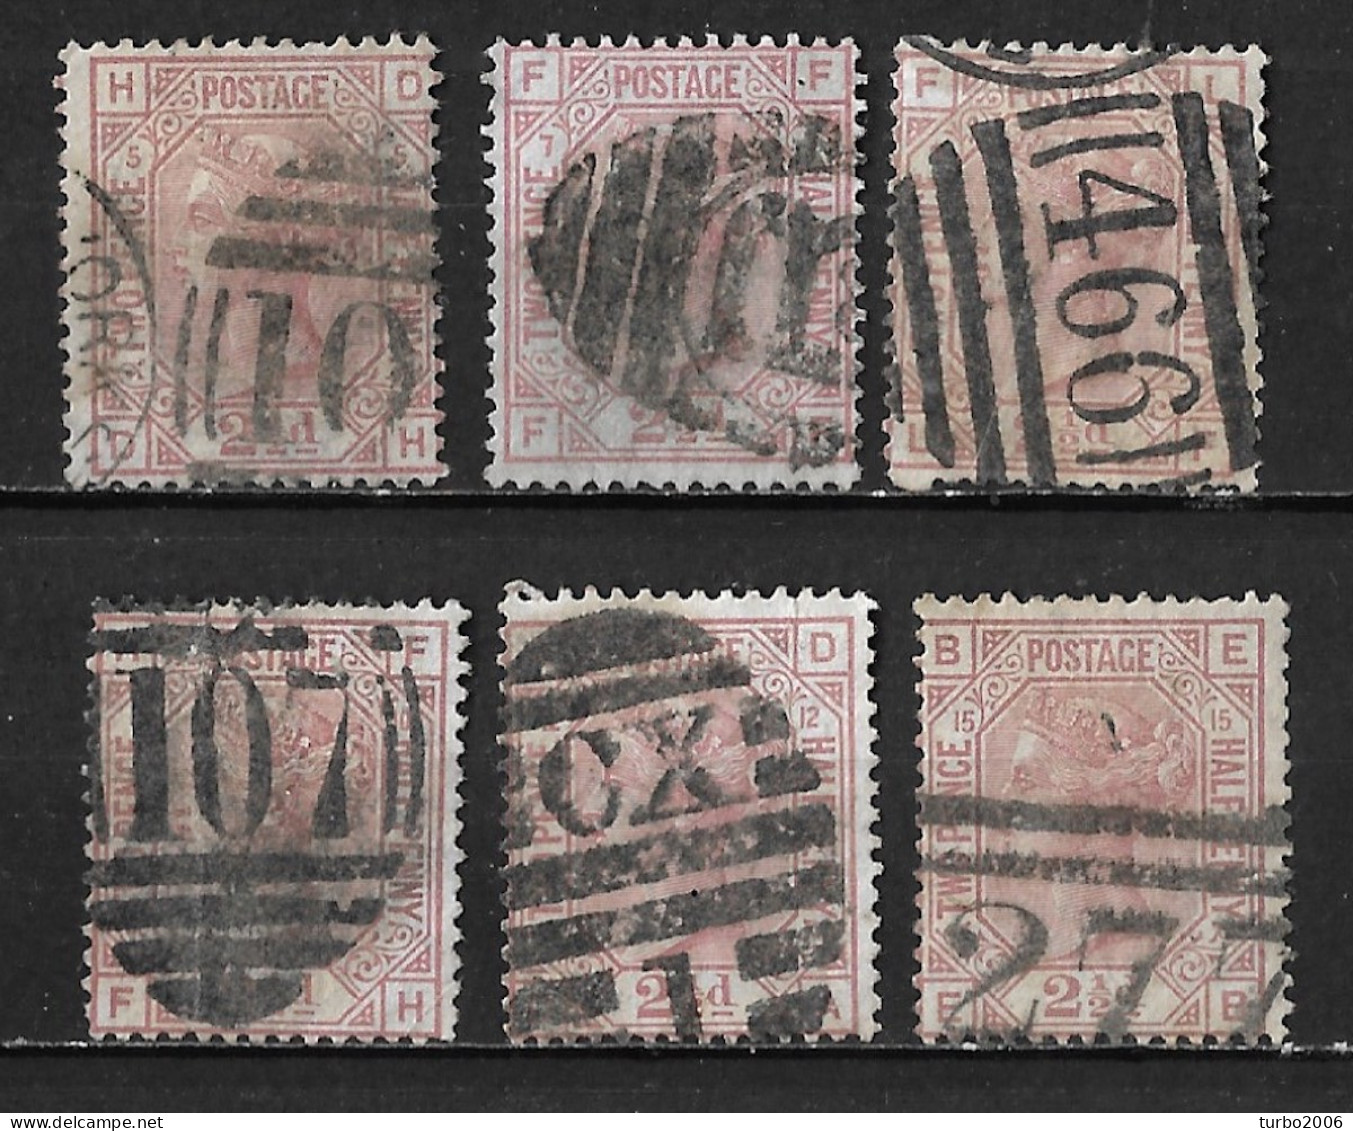 G.B.1876 Queen Victoria 2½ P Lila Rose WM 10 Michel 47 (SG 141) 6 Different Plates 5-7-9-10-12-15 As Shown On 7 Scans - Usati